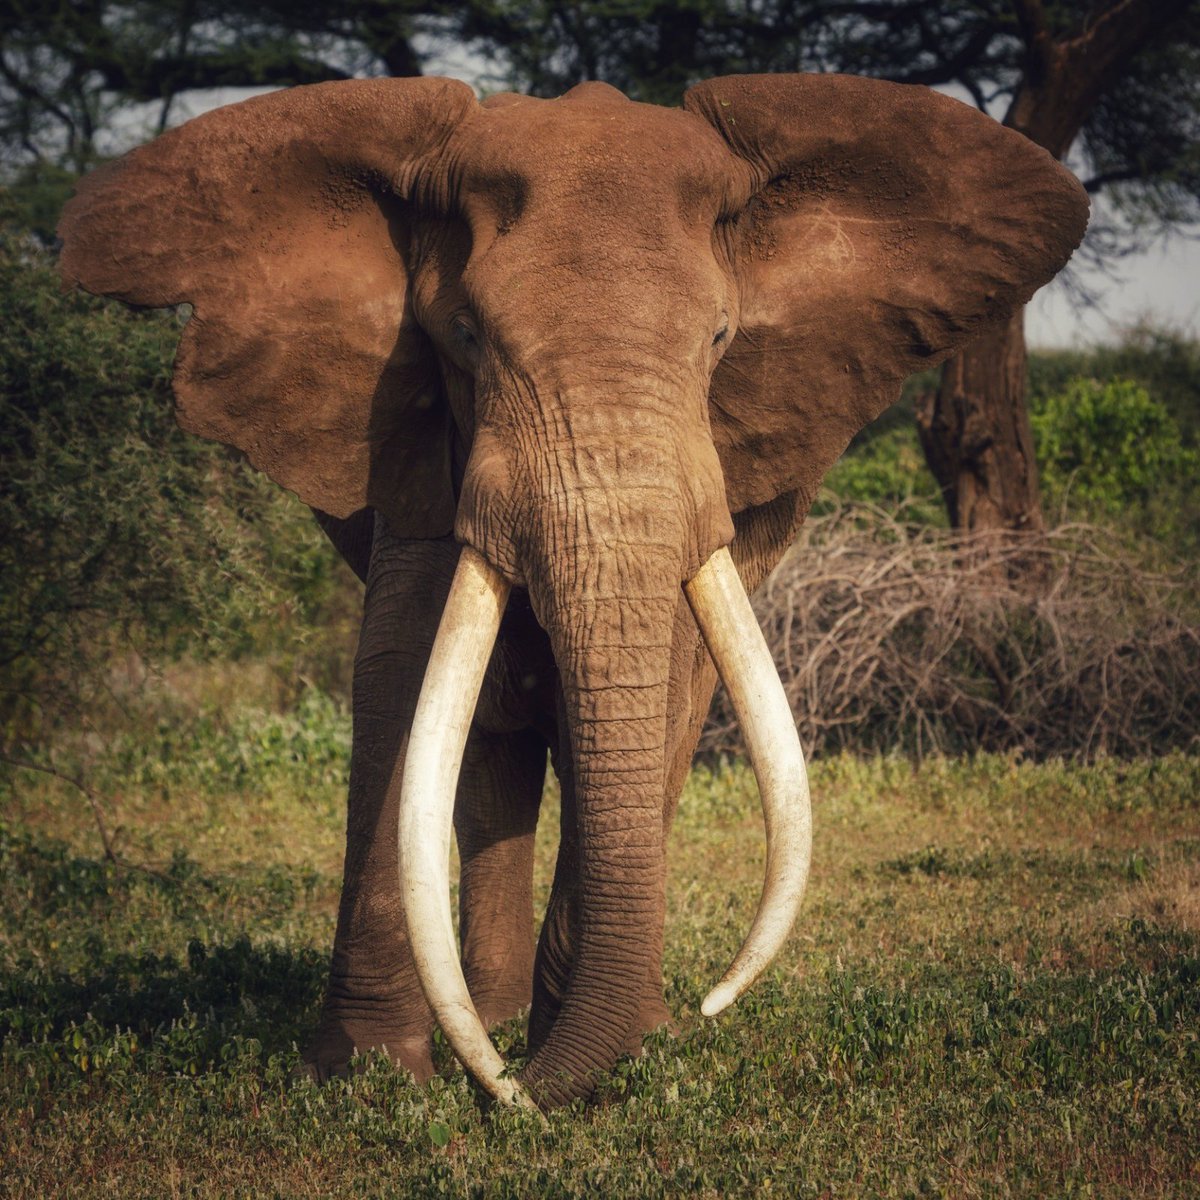 What makes an elephant a #SuperTusker ?

A Super Tusker is a bull elephant with tusks that each weigh over 100 p (45 kilo) and are so long that they often touch the ground.
There are roughly a few of these magnificent beasts left in the world, with most concentrated in Kenya.